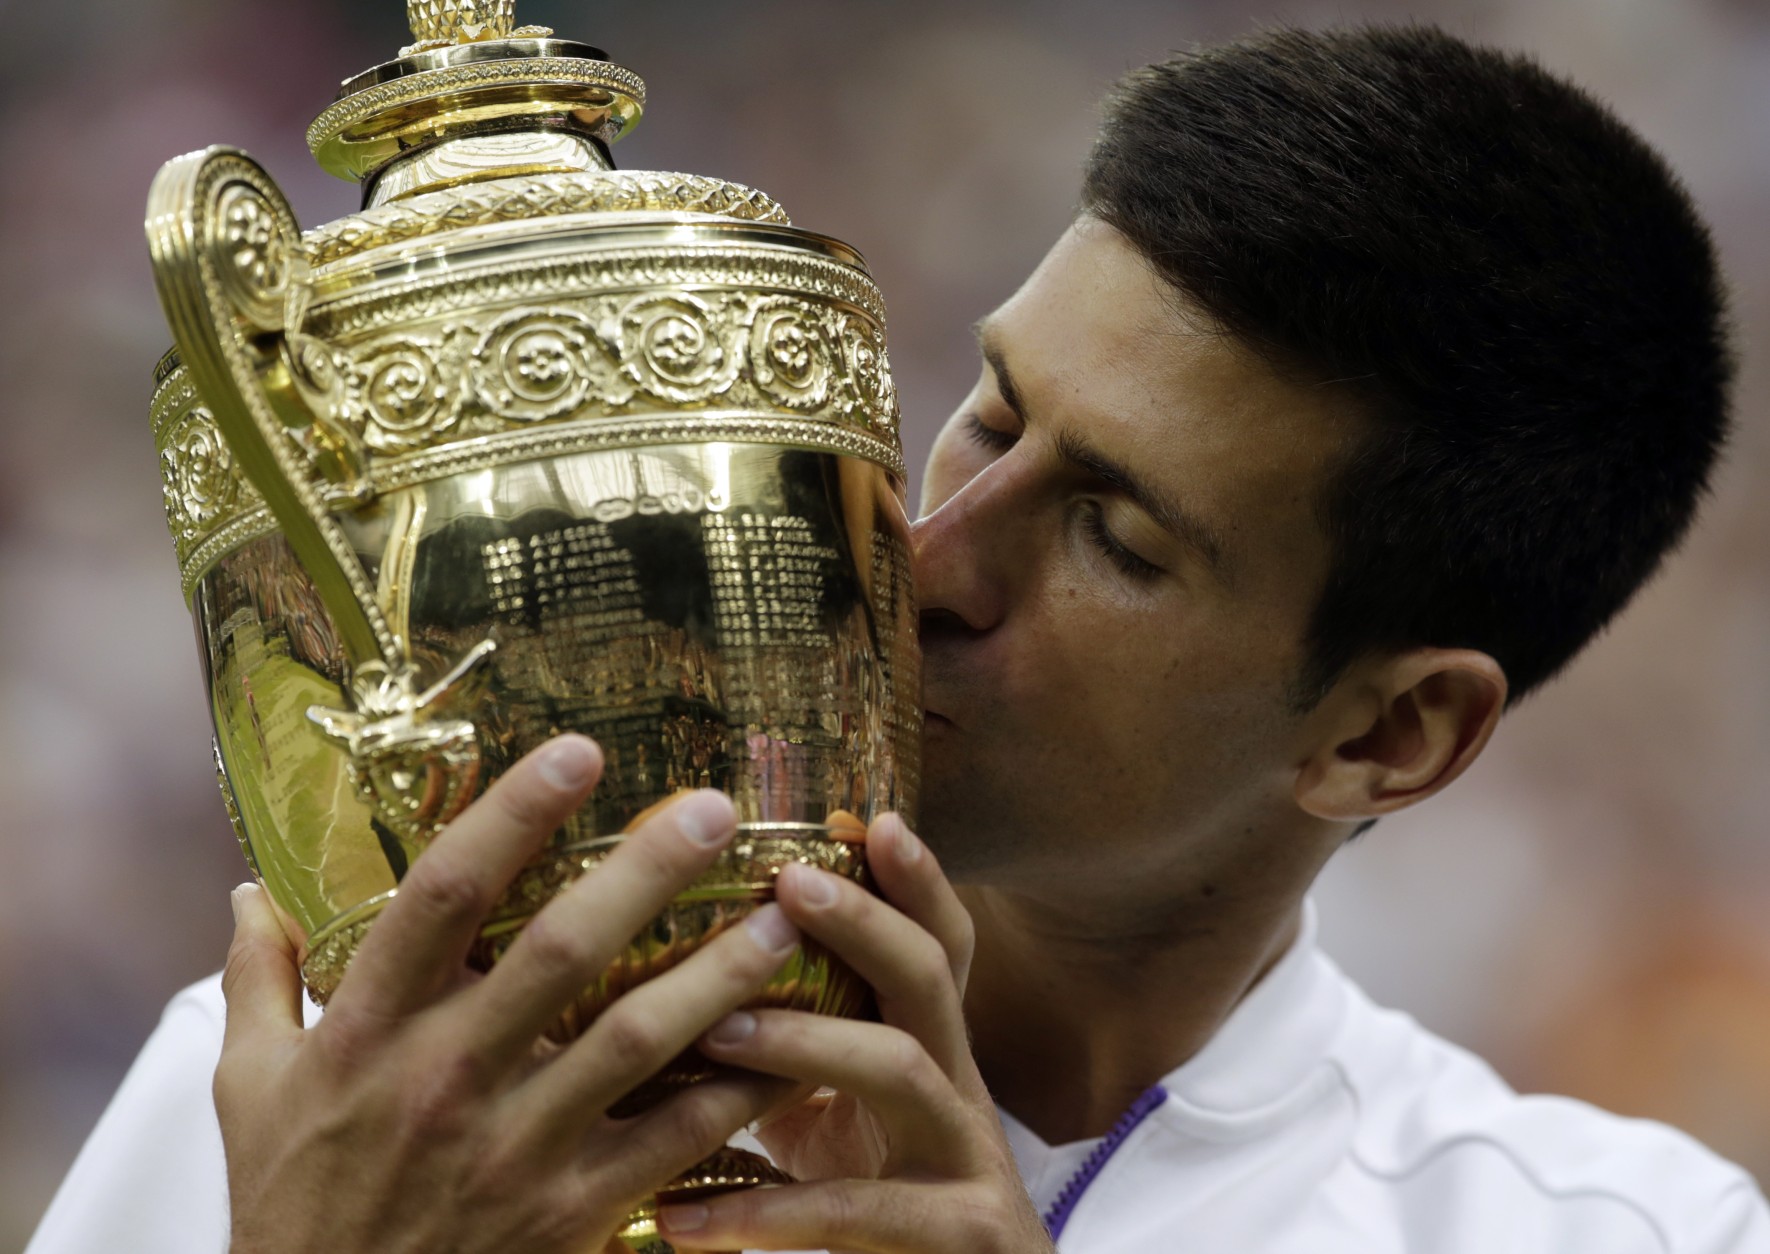 Novak Djokovic of Serbia kisses the trophy after winning the men's singles final against Roger Federer of Switzerland at the All England Lawn Tennis Championships in Wimbledon, London, Sunday July 12, 2015. Djokovic won the match 7-6, 6-7, 6-4, 6-3. (AP Photo/Alastair Grant)